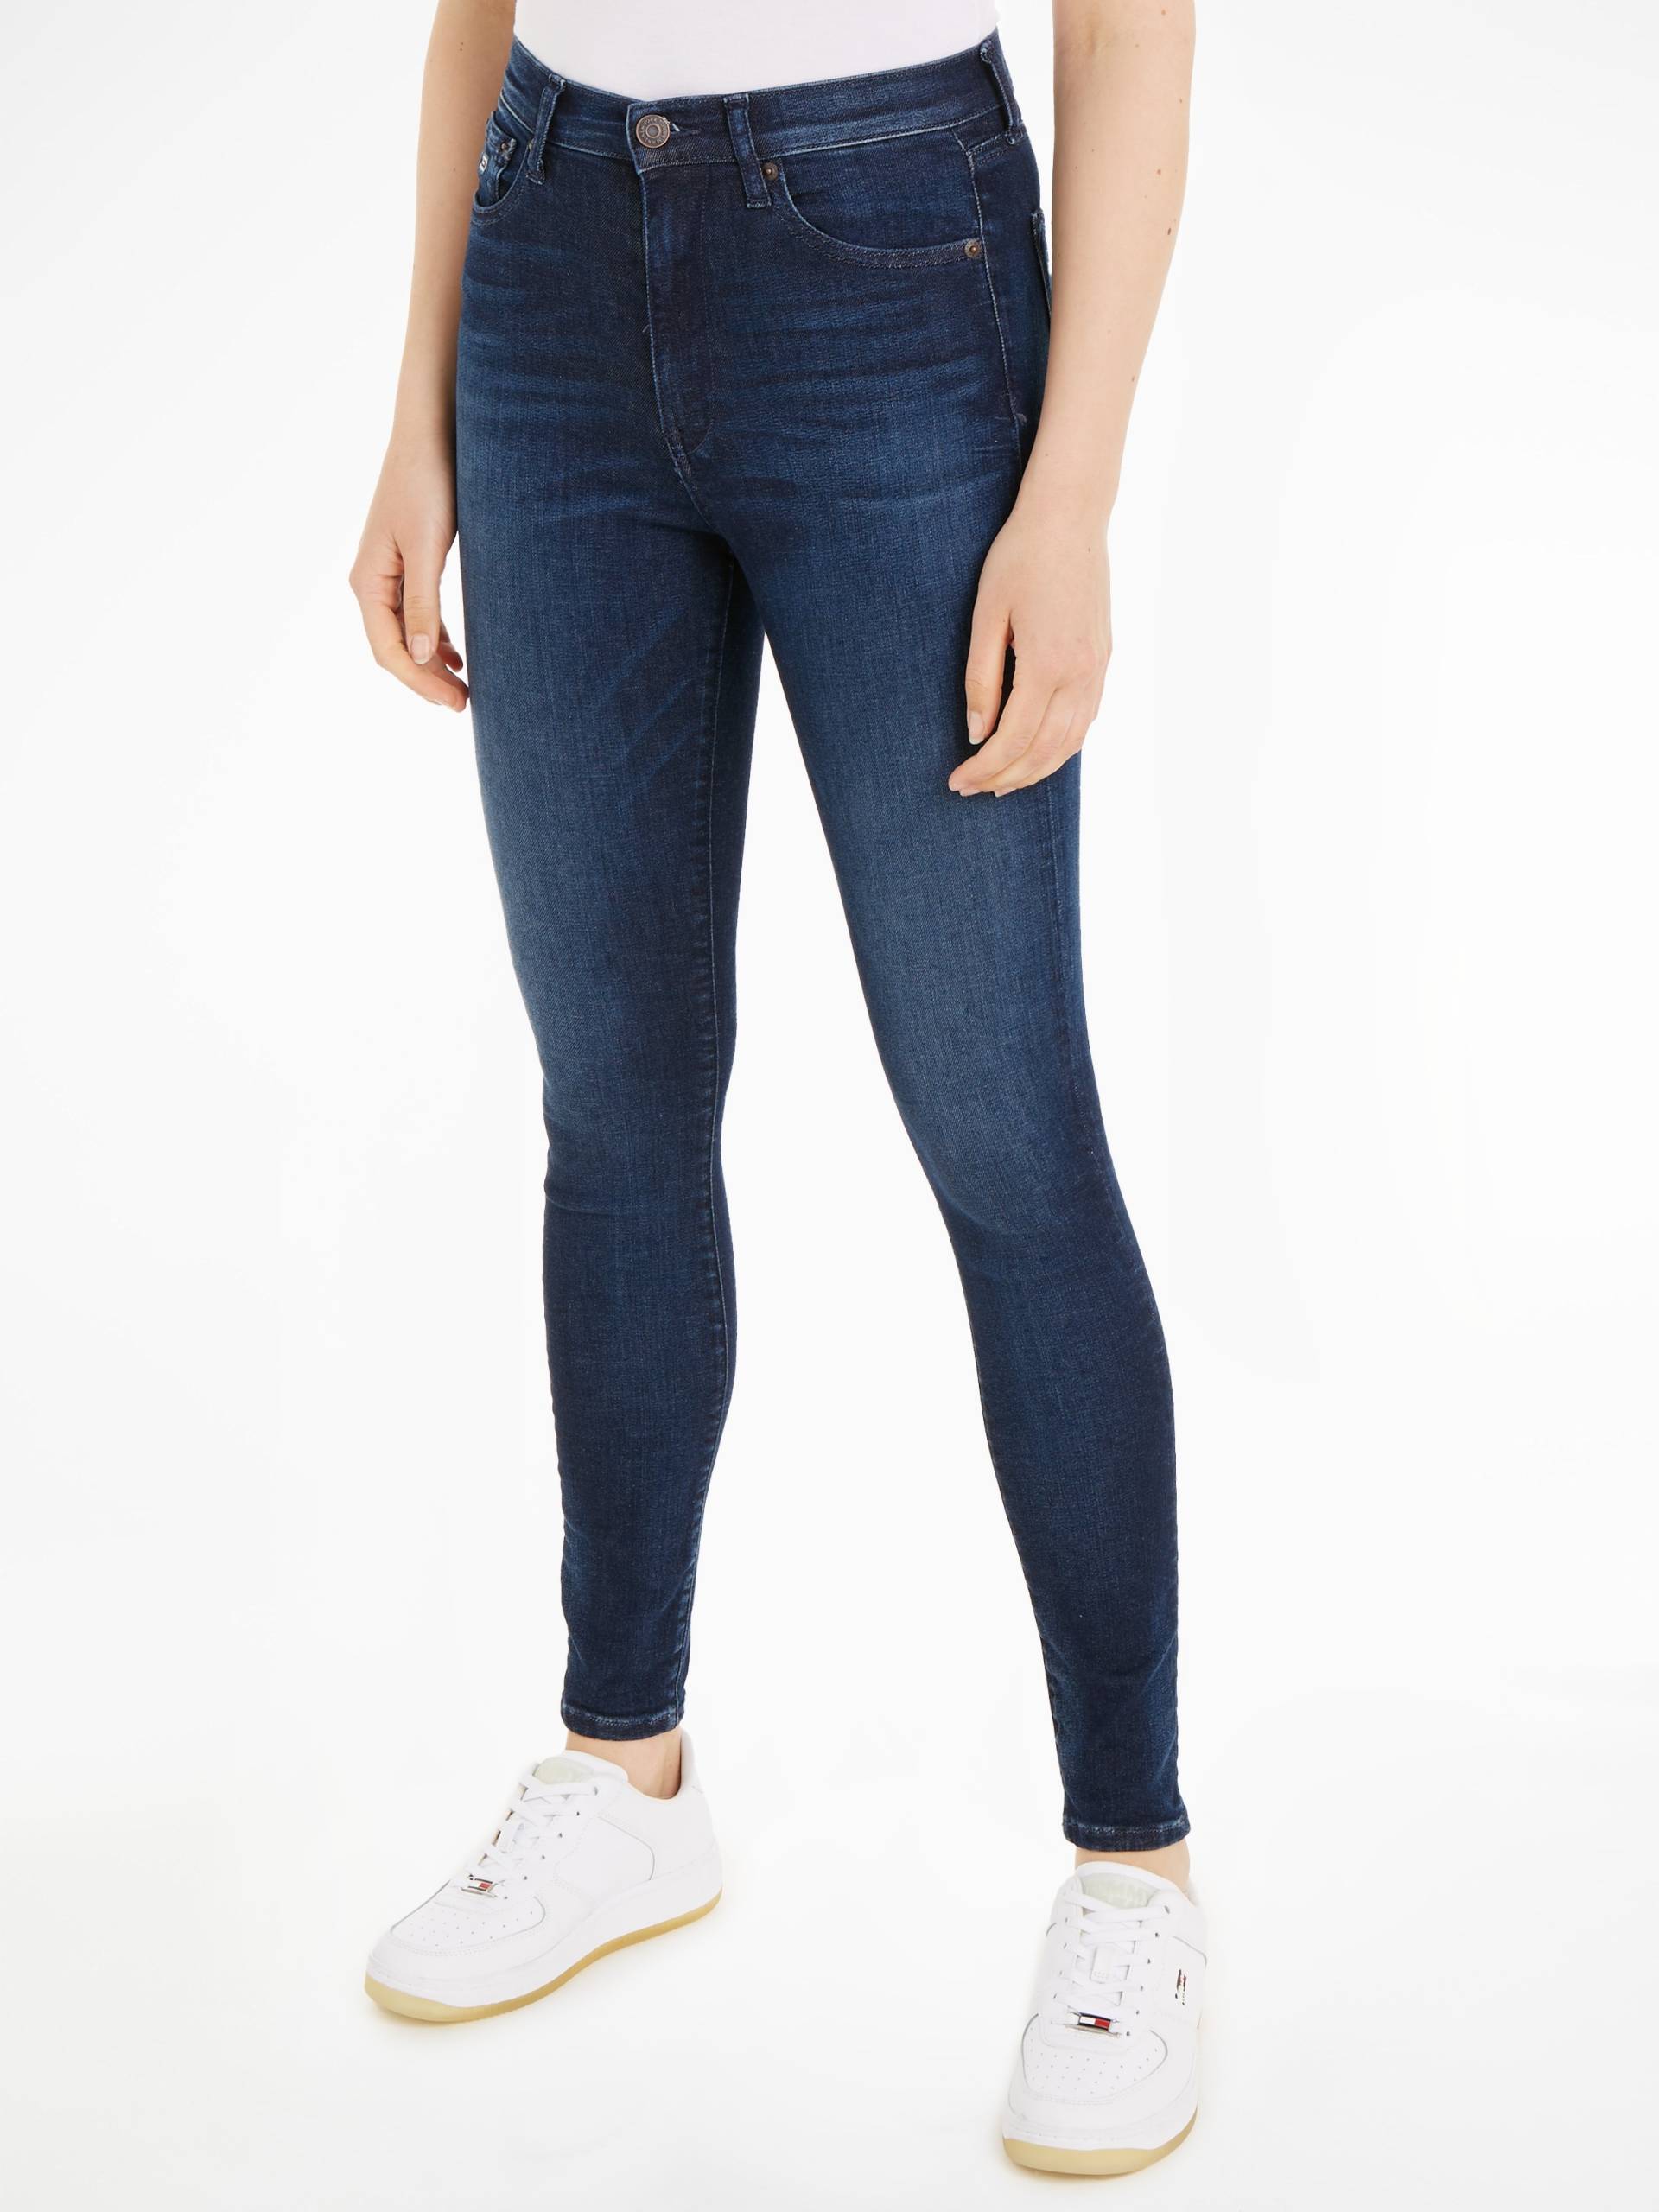 Tommy Jeans Bequeme Jeans »Sylvia Skinny Slim Jeans Hohe Leibhöhe« von TOMMY JEANS